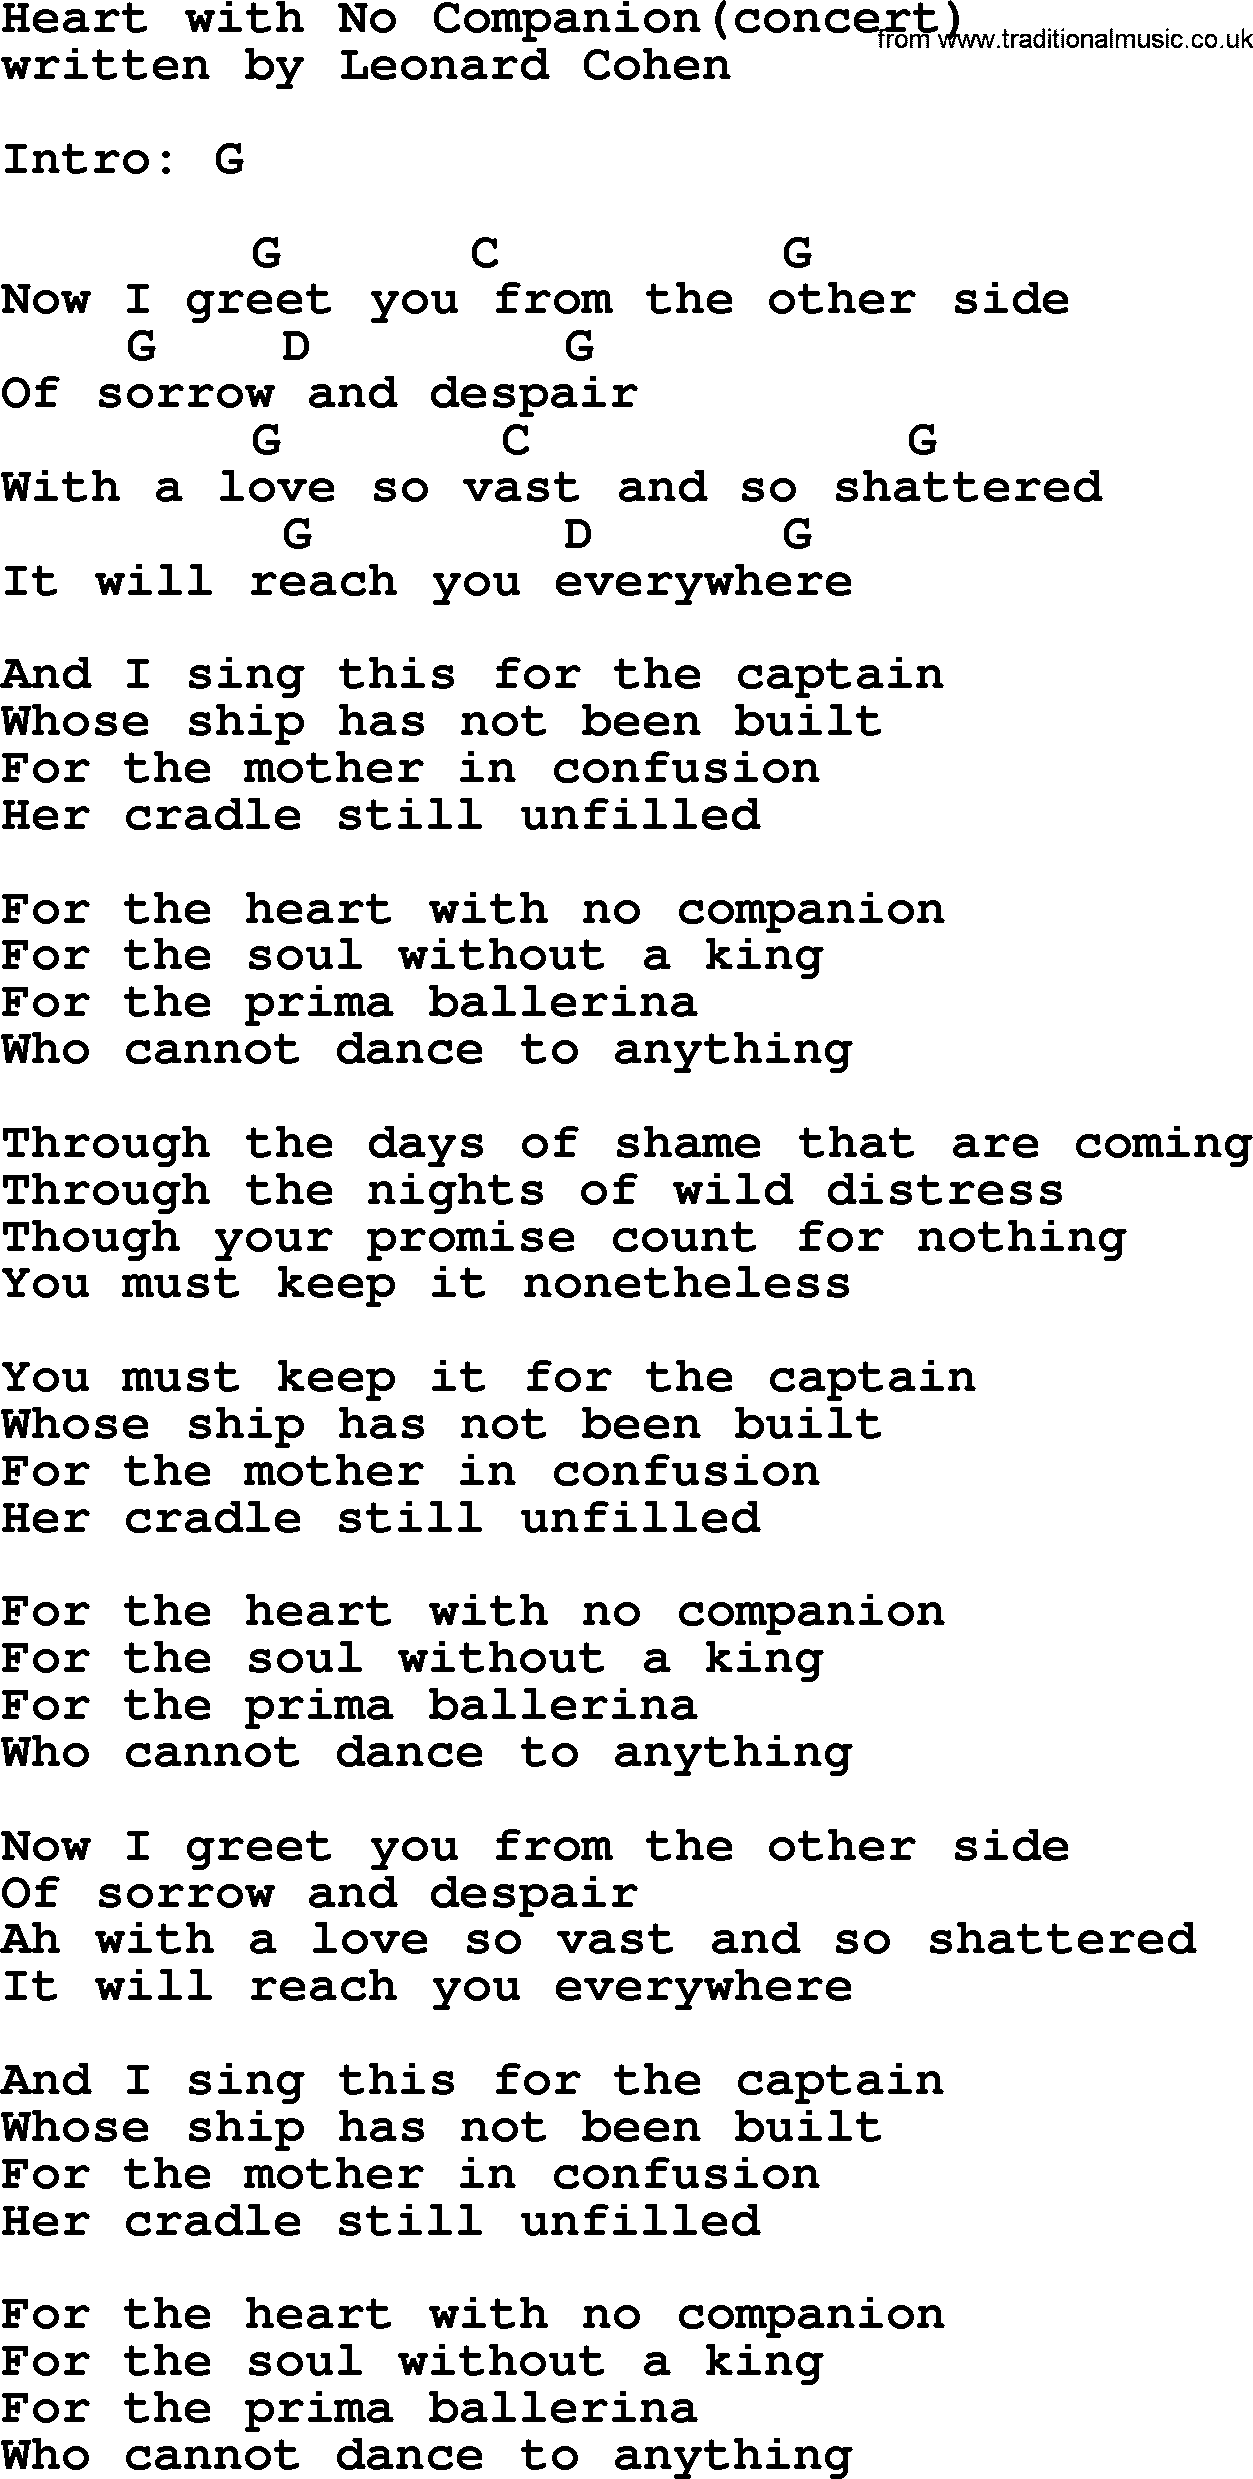 Leonard Cohen song Heart With No Companion(concert), lyrics and chords